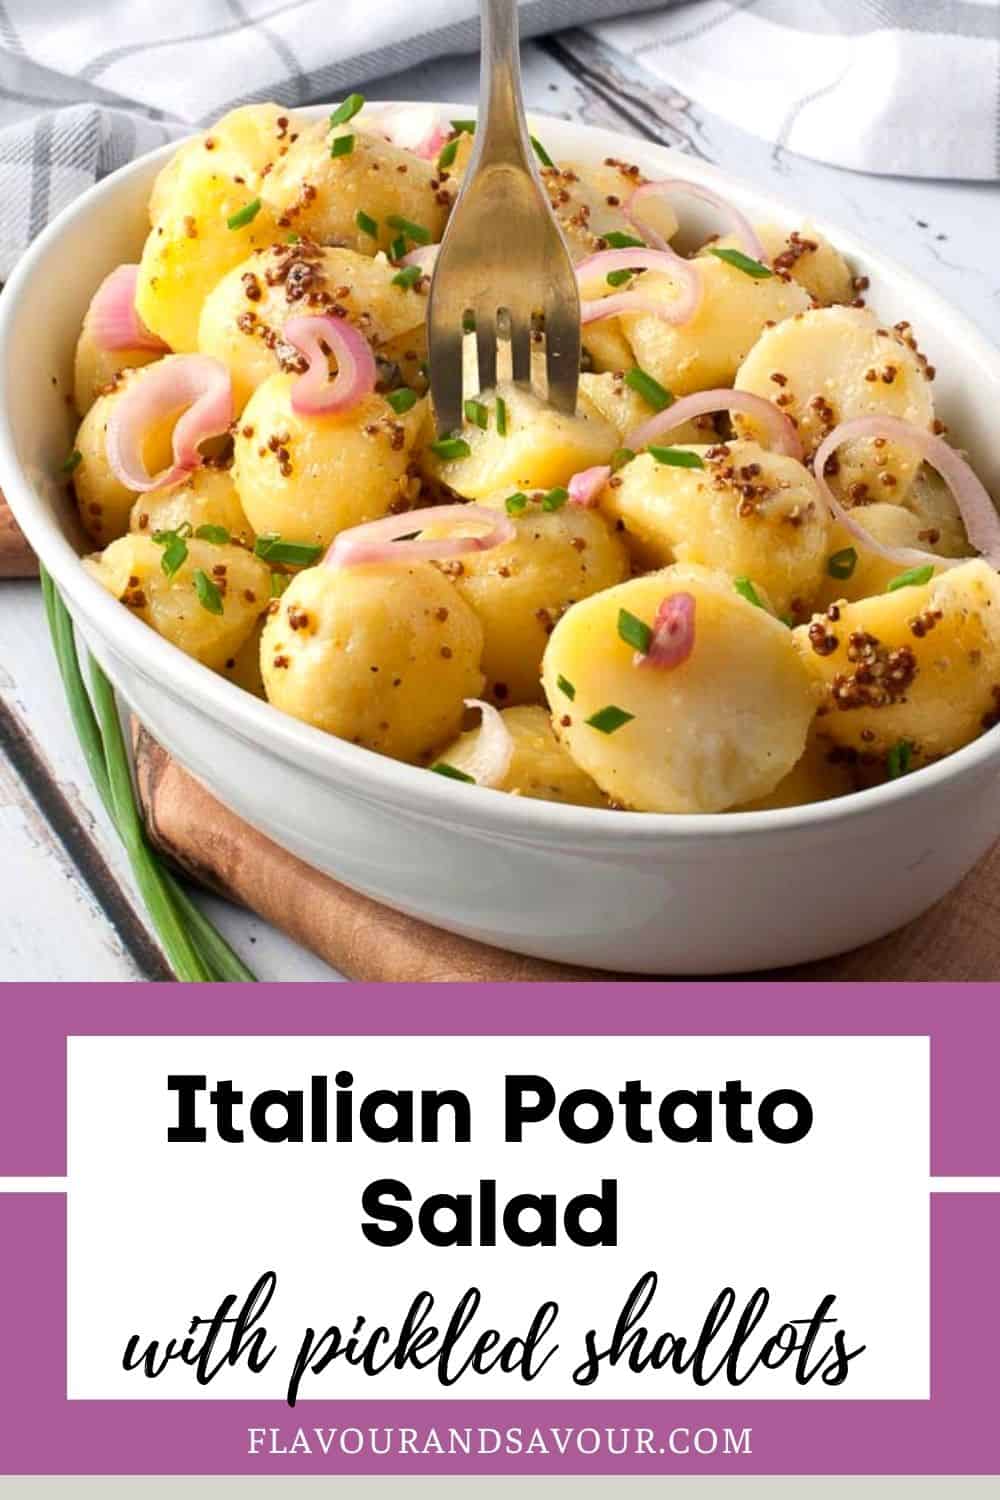 Image with text for Italian Potato Salad with Pickled Shallots.